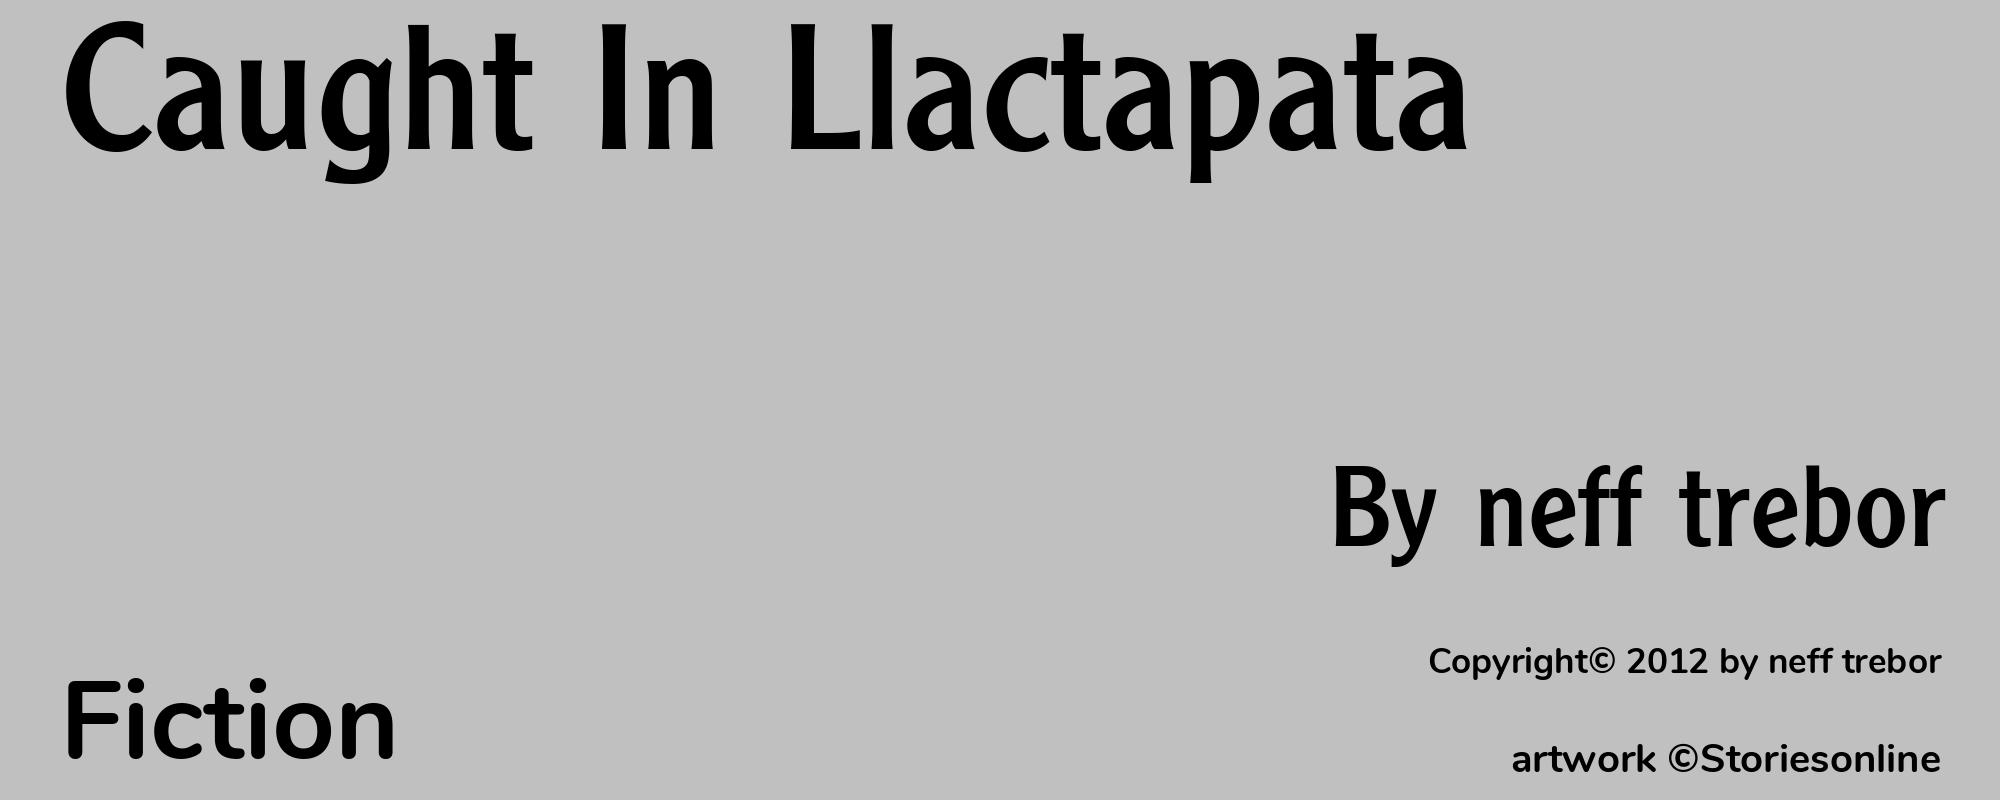 Caught In Llactapata - Cover